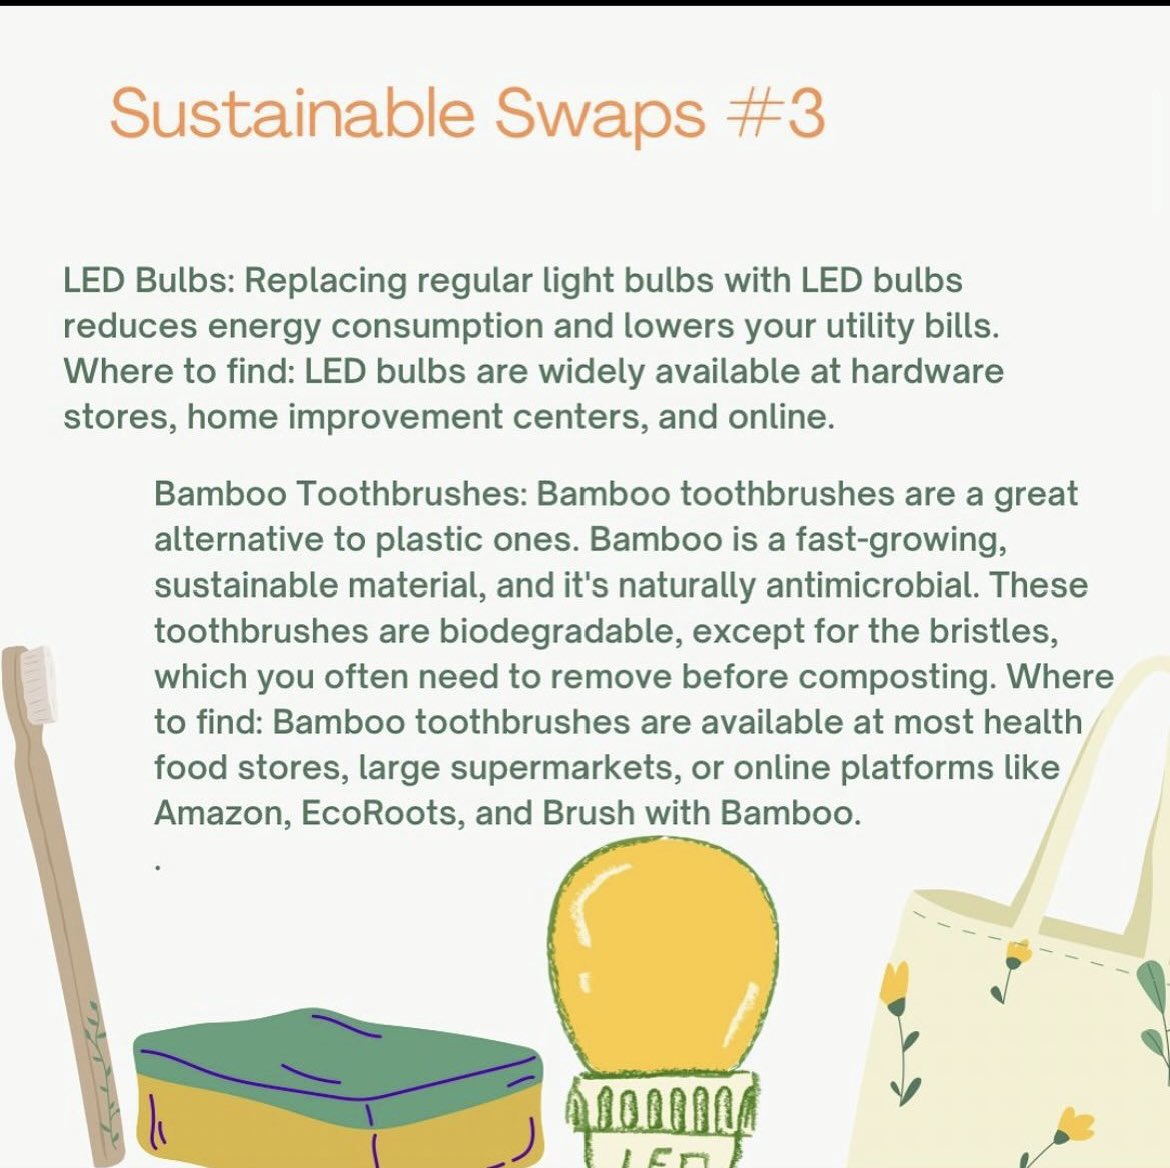 Small changes like switching to LED bulbs and using bamboo toothbrushes can make a big difference in reducing our environmental footprint.
#SustainableLiving #ReducePlastic #GreenLiving